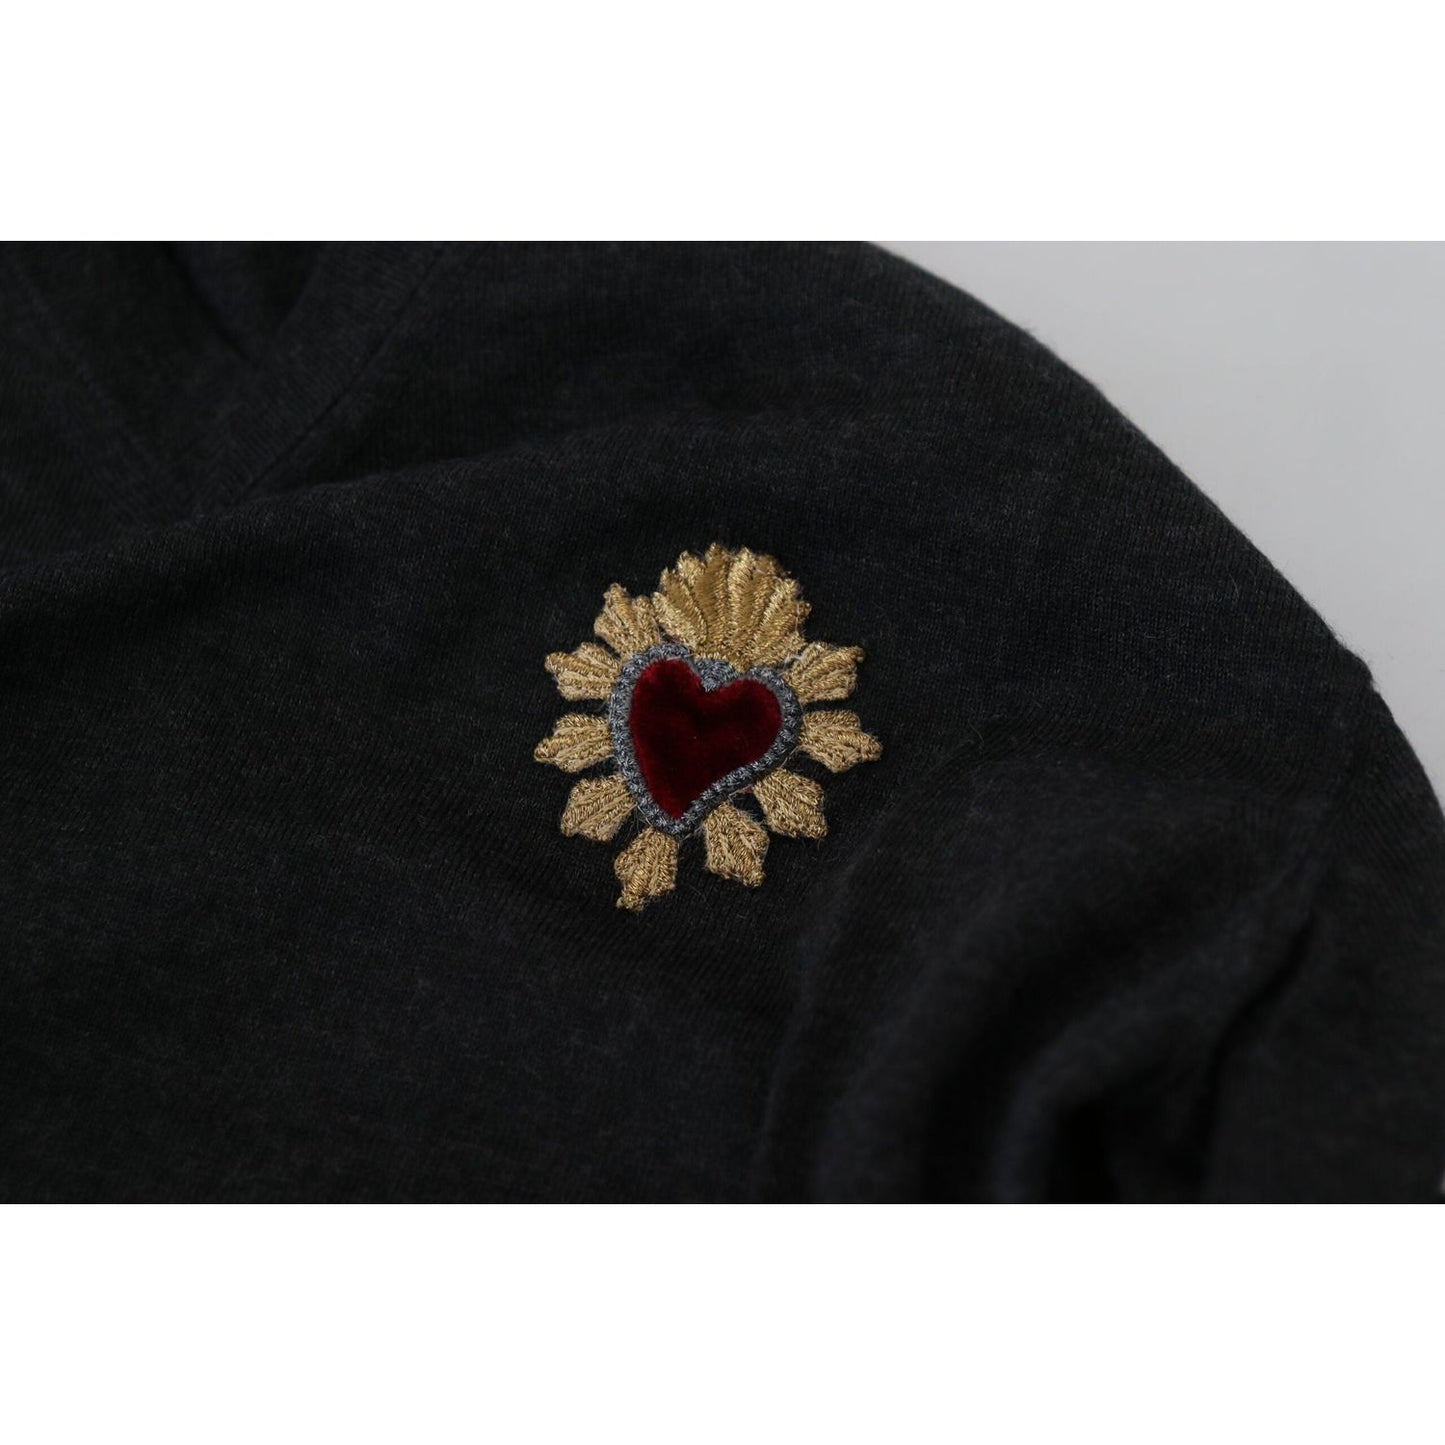 Dolce & Gabbana V-Neck Cashmere Sweater with Heart Embroidery gray-cashmere-v-neck-gold-heart-sweater IMG_2072-scaled-377fb0b1-59a.jpg